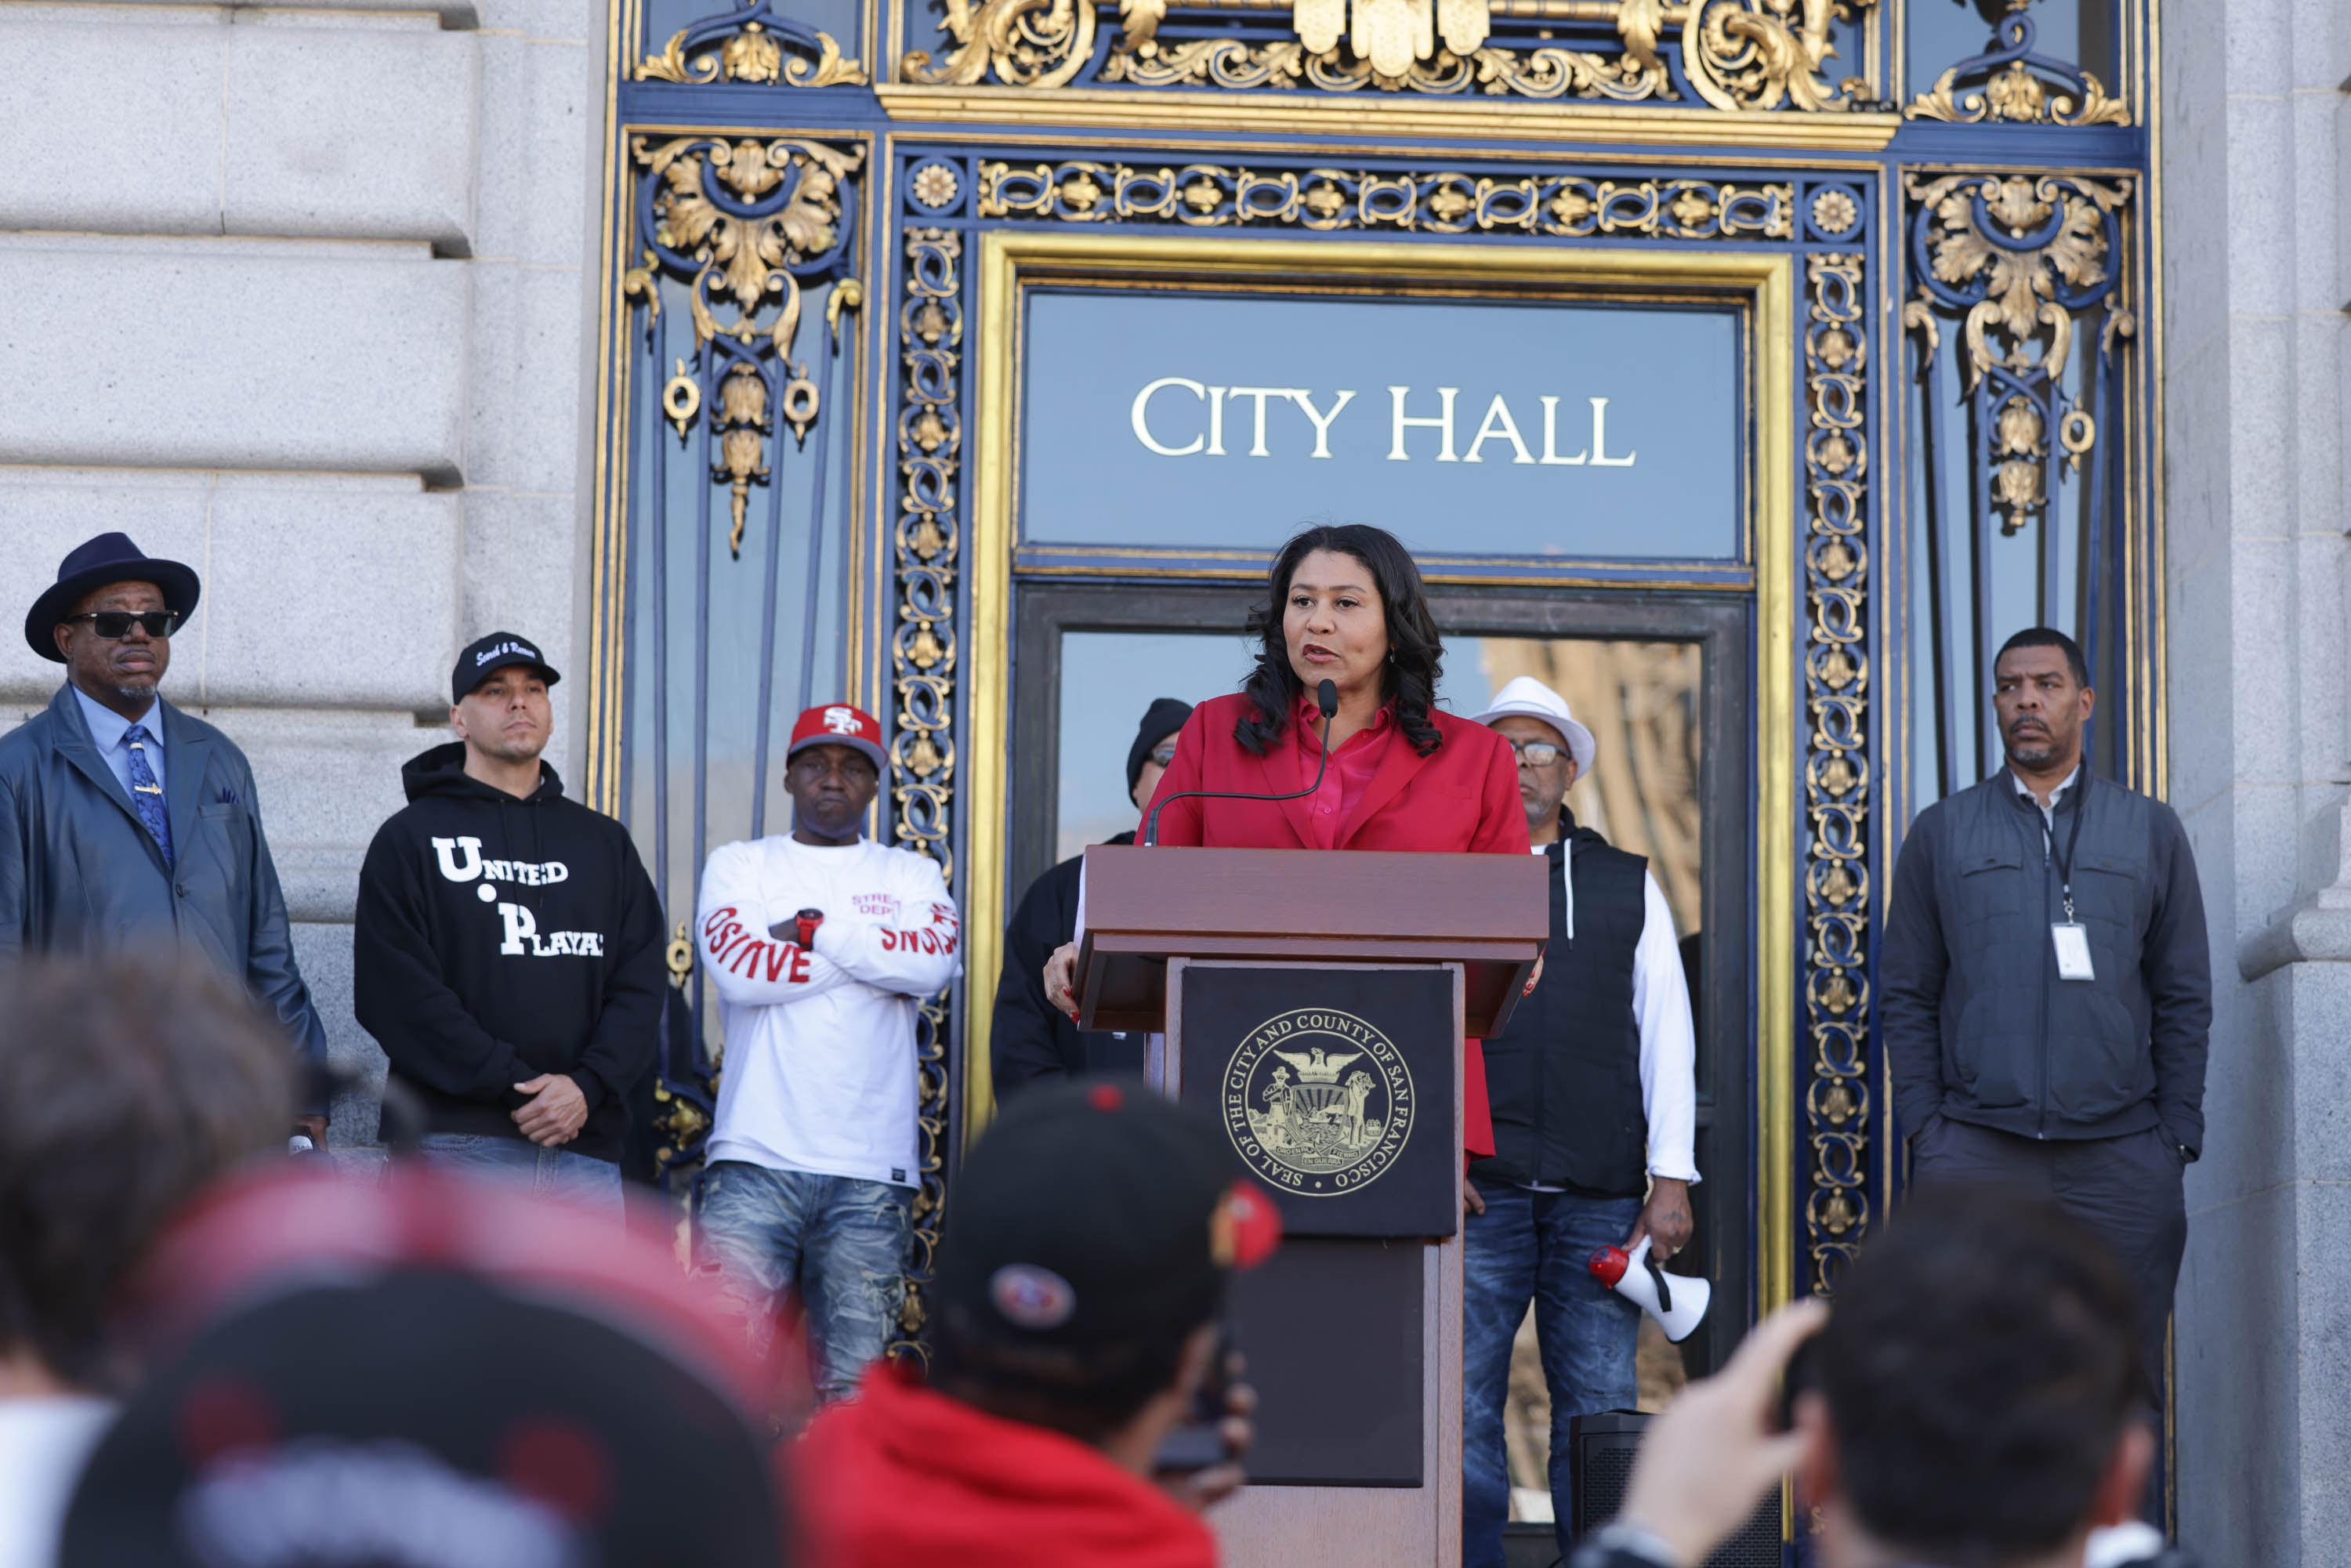 A woman speaks at a podium marked &quot;CITY HALL&quot; with onlookers behind her, some wearing shirts with &quot;UNITE&quot; and &quot;SAVE&quot; visible.